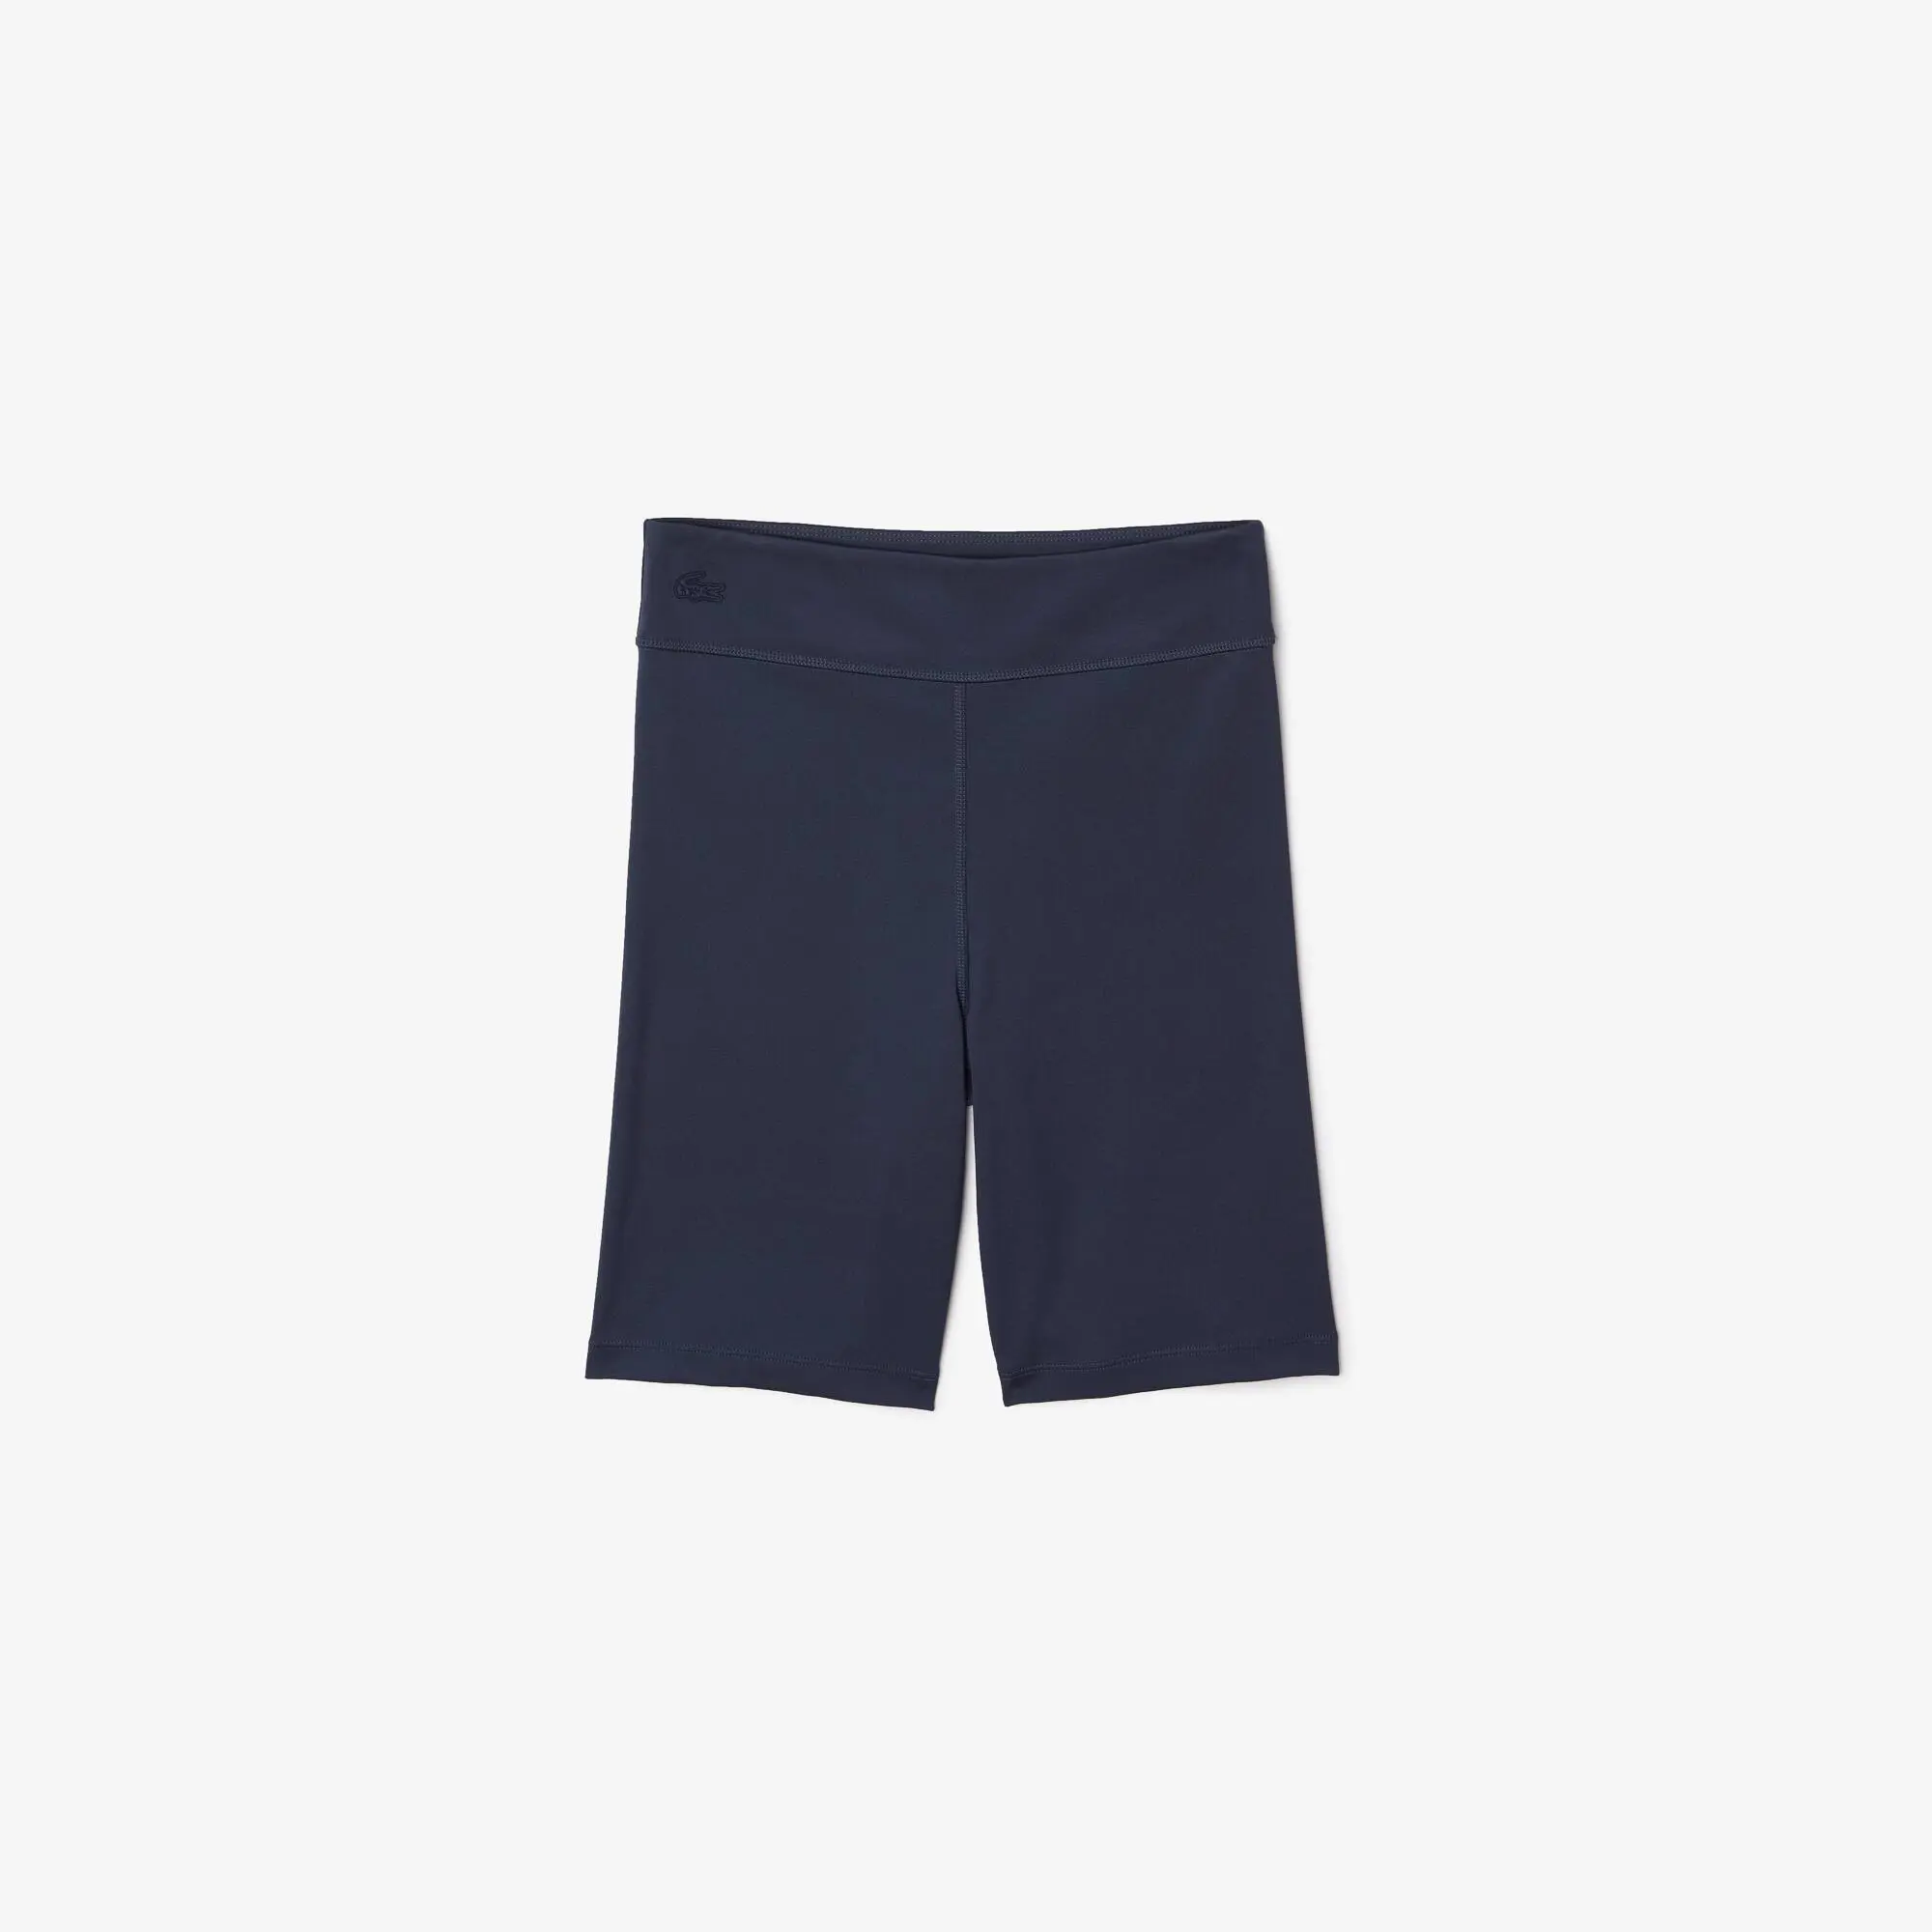 Lacoste Girls’ Lacoste Recycled Fiber Cycle Shorts. 1